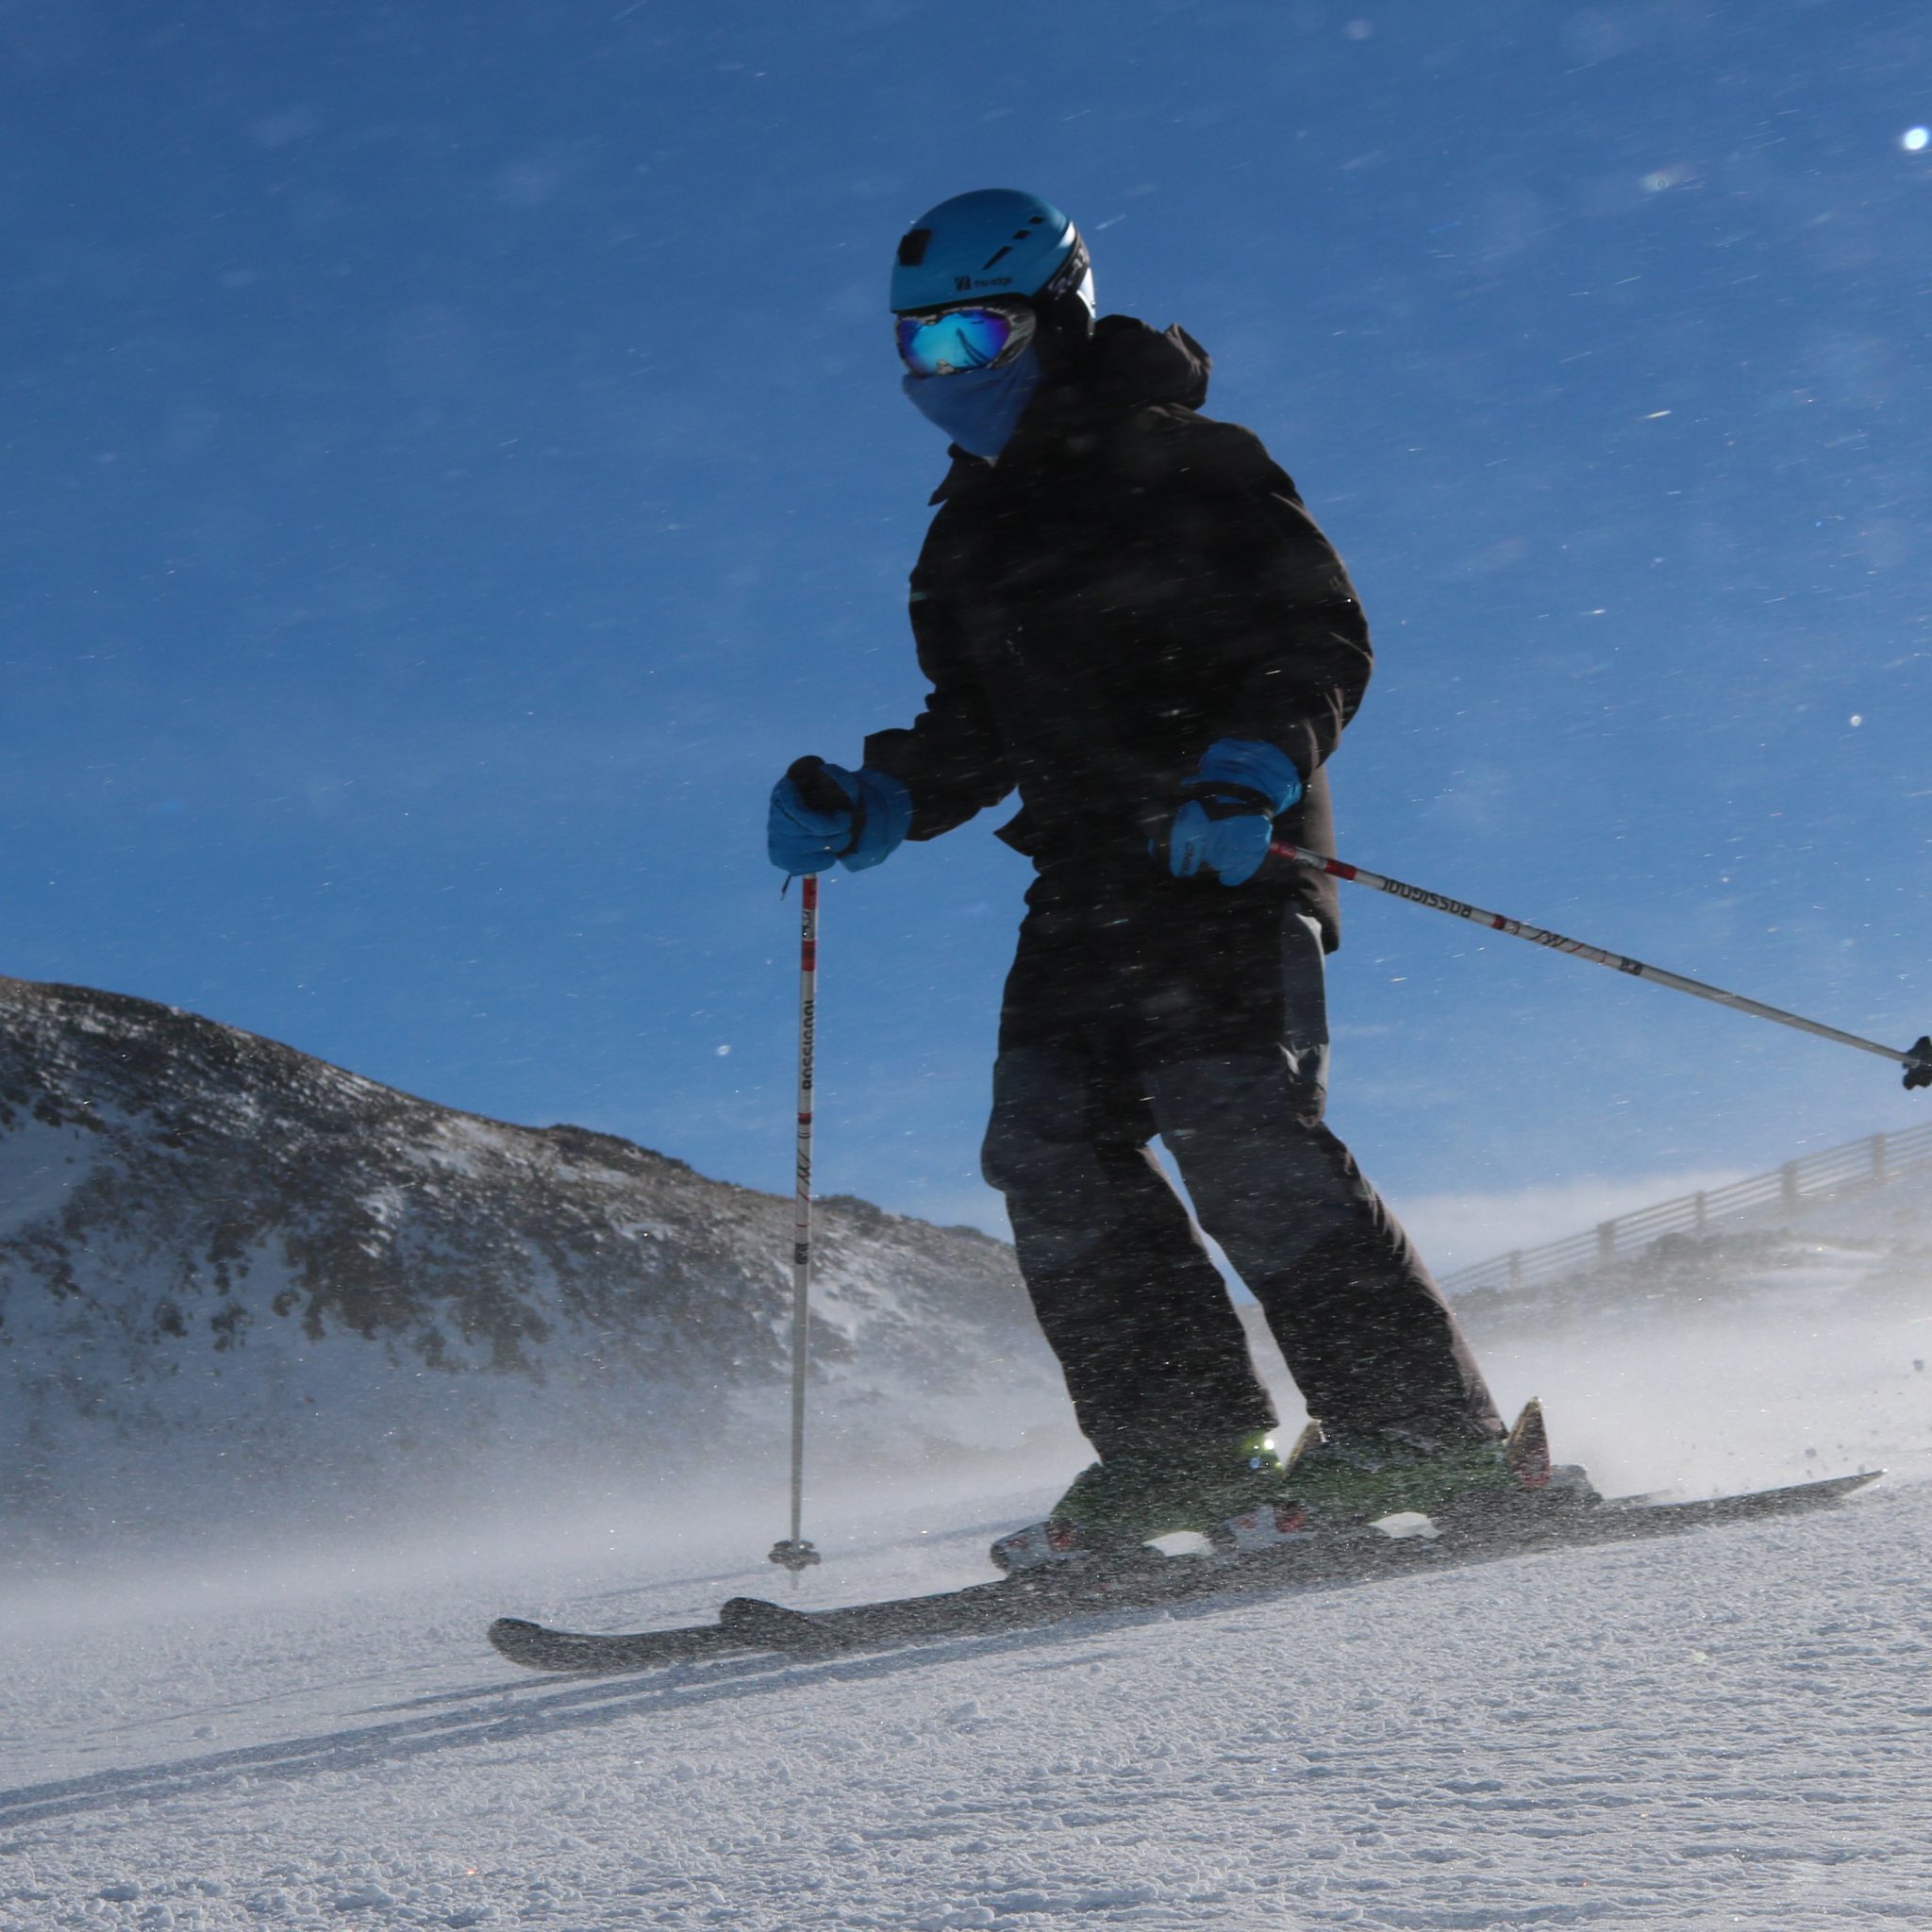 Ski Hire in Aviemore Online! Book online today for your holiday.